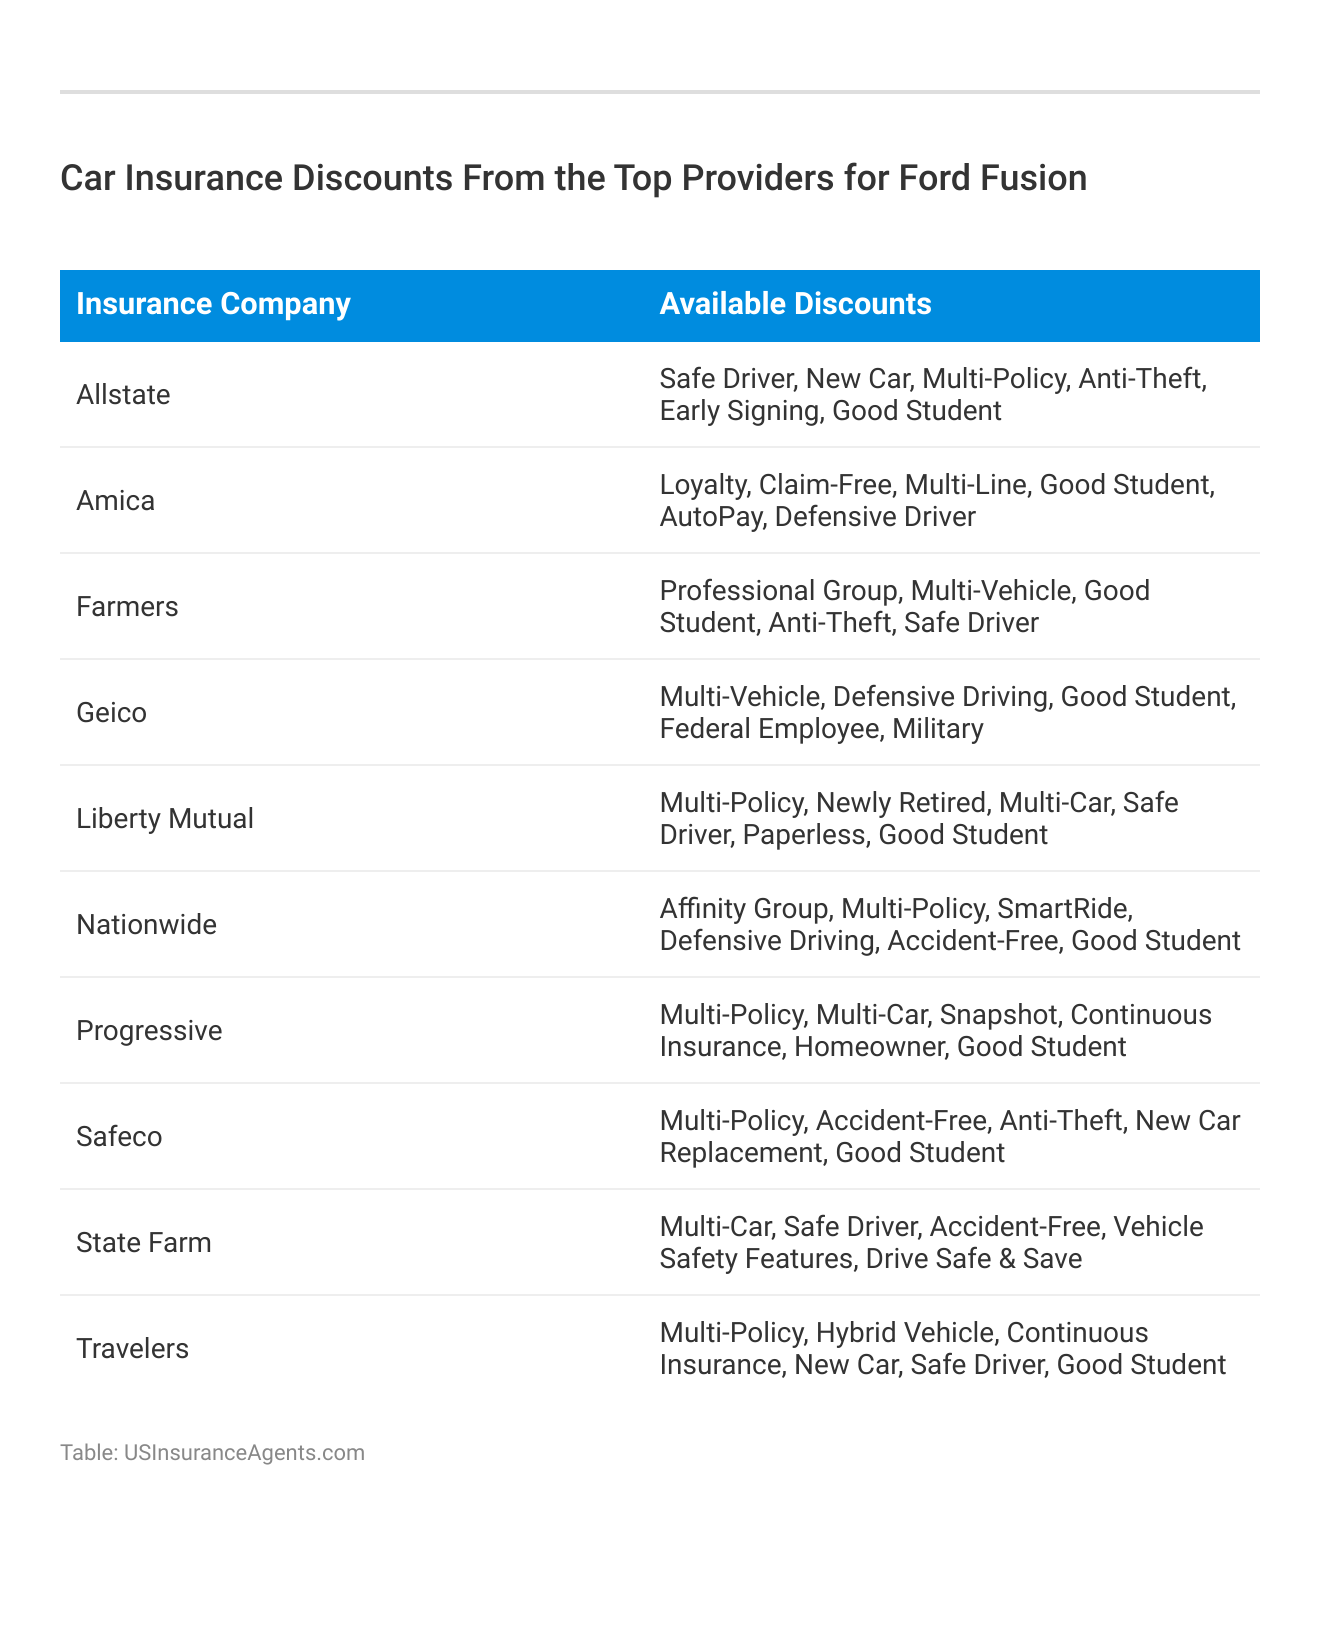 <h3>Car Insurance Discounts From the Top Providers for Ford Fusion</h3>